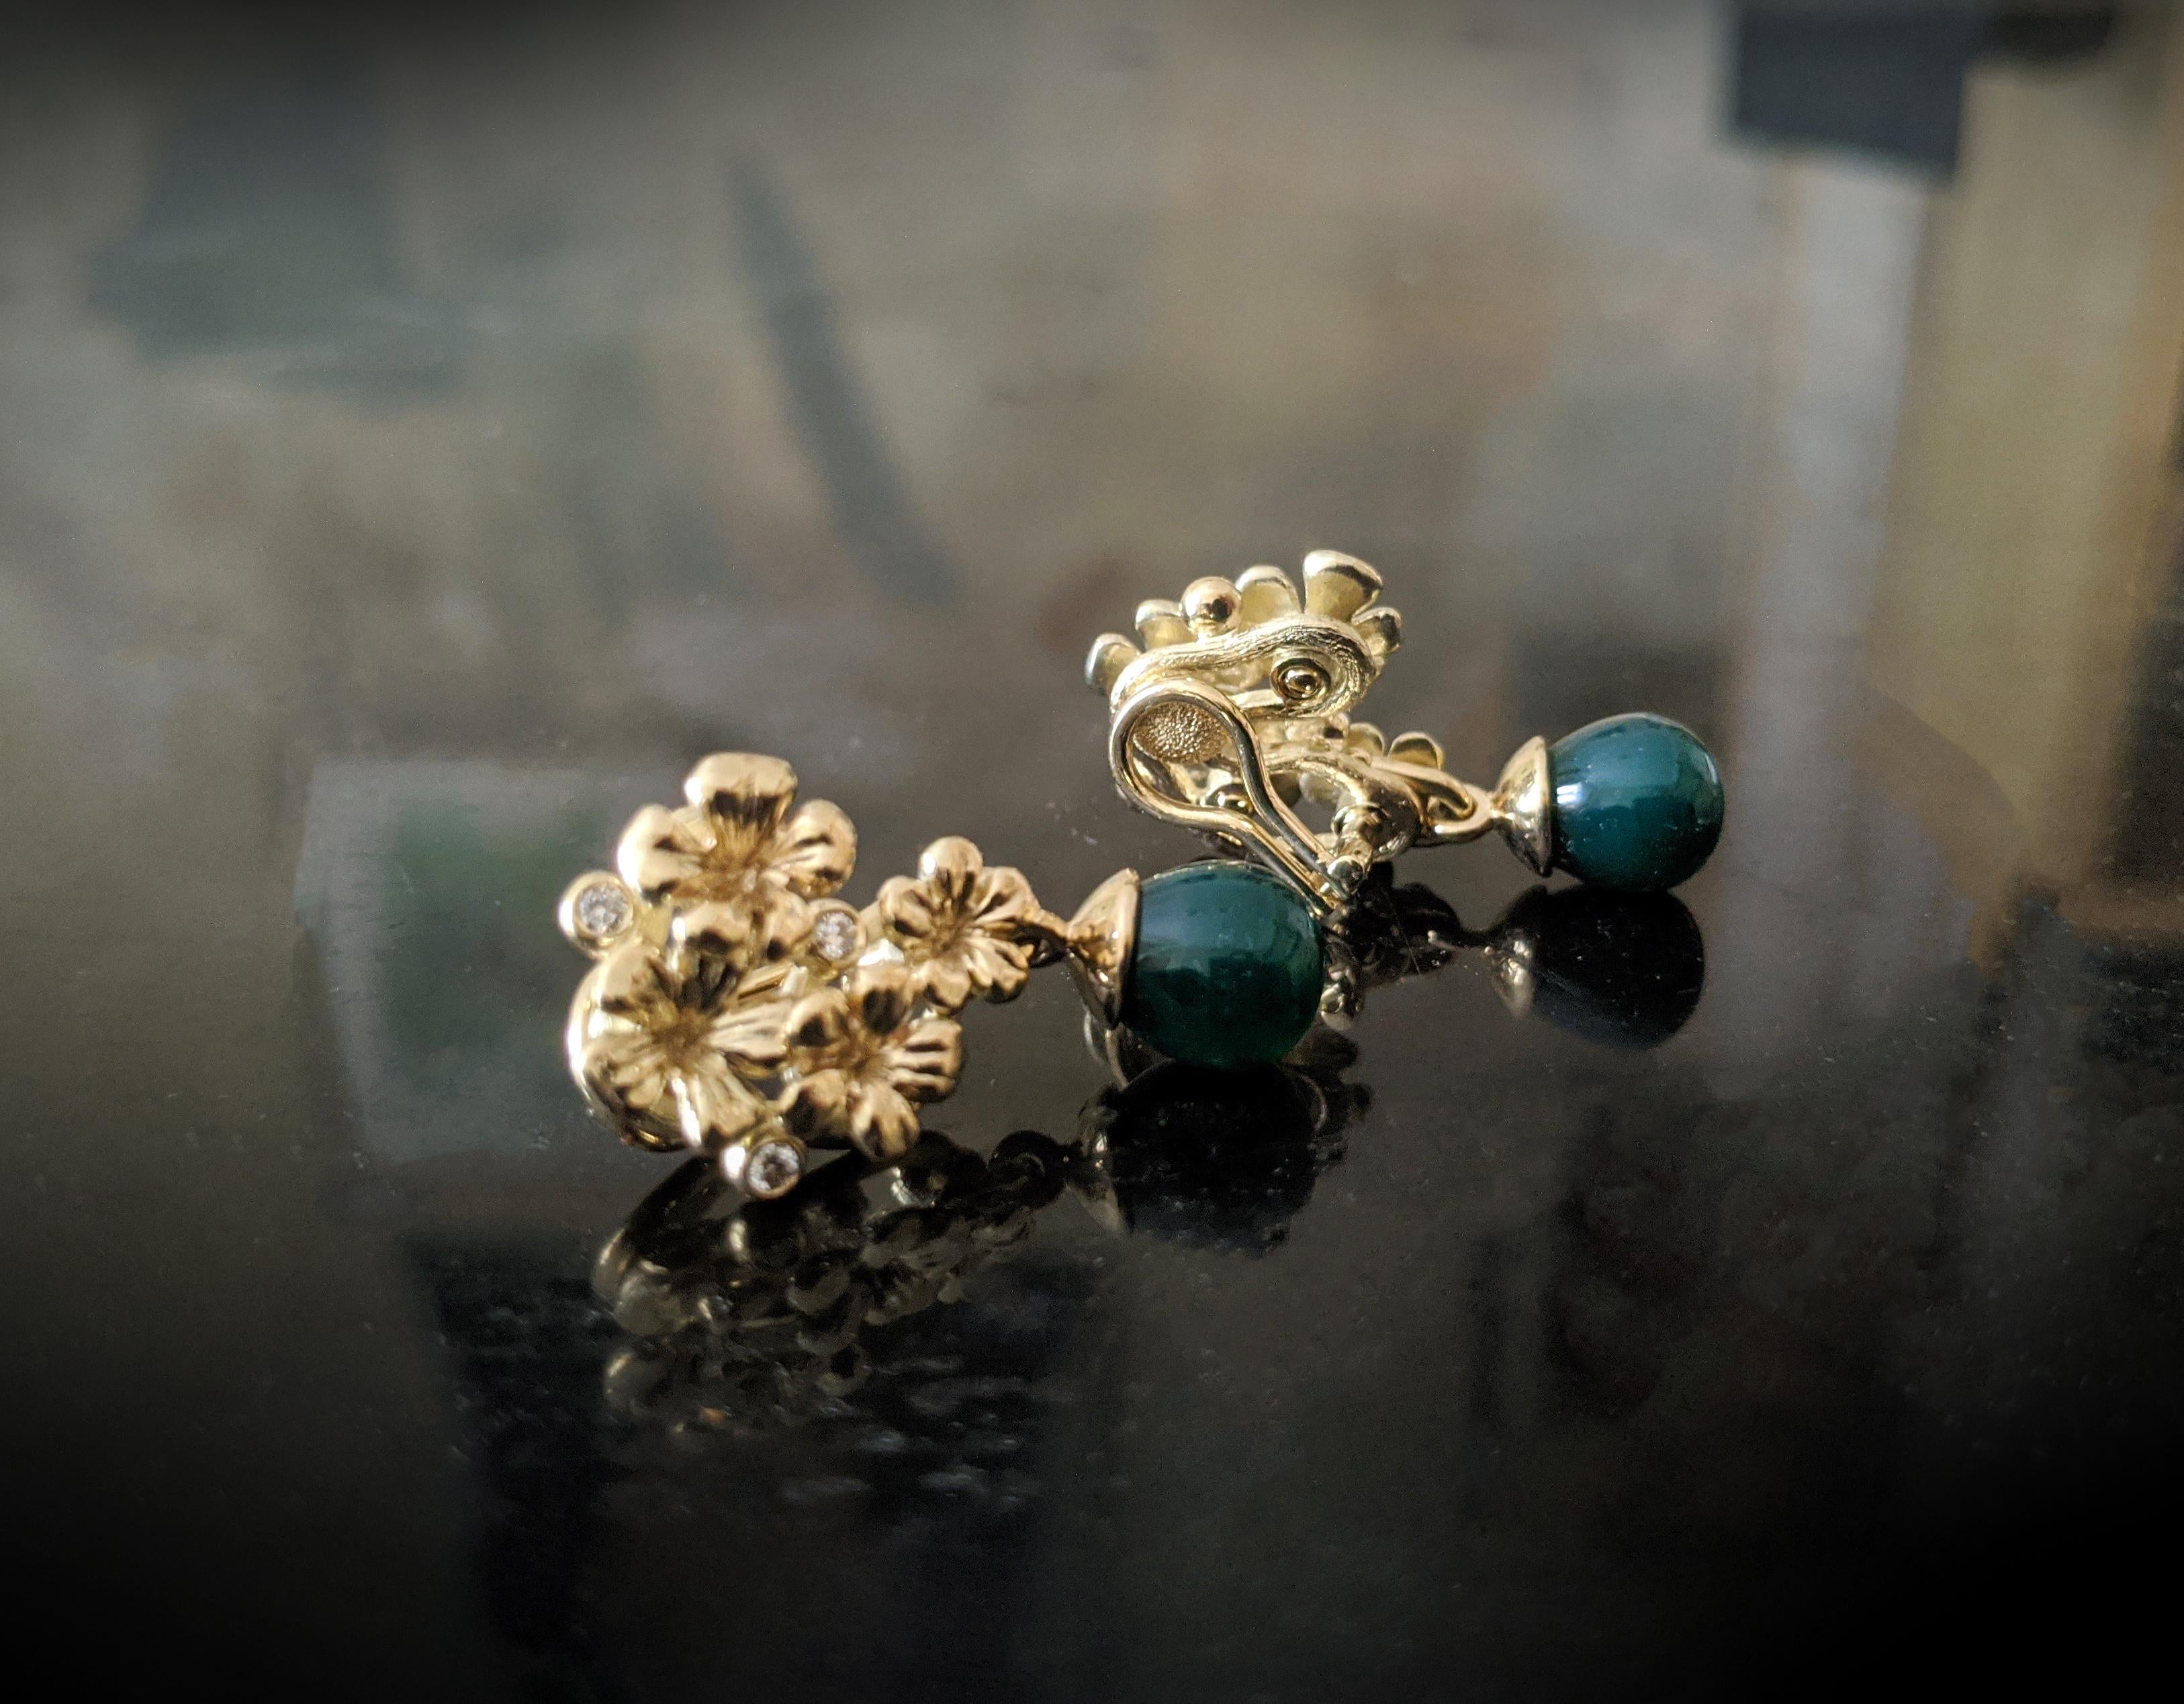 These clip-on earrings are made of 14-karat yellow gold and encrusted with 6 round diamonds and cabochon chalcedonies, which can be removed to wear the earrings separately. The size of one earring is 2x1.7 cm, and the depth without a lock is 5 mm.